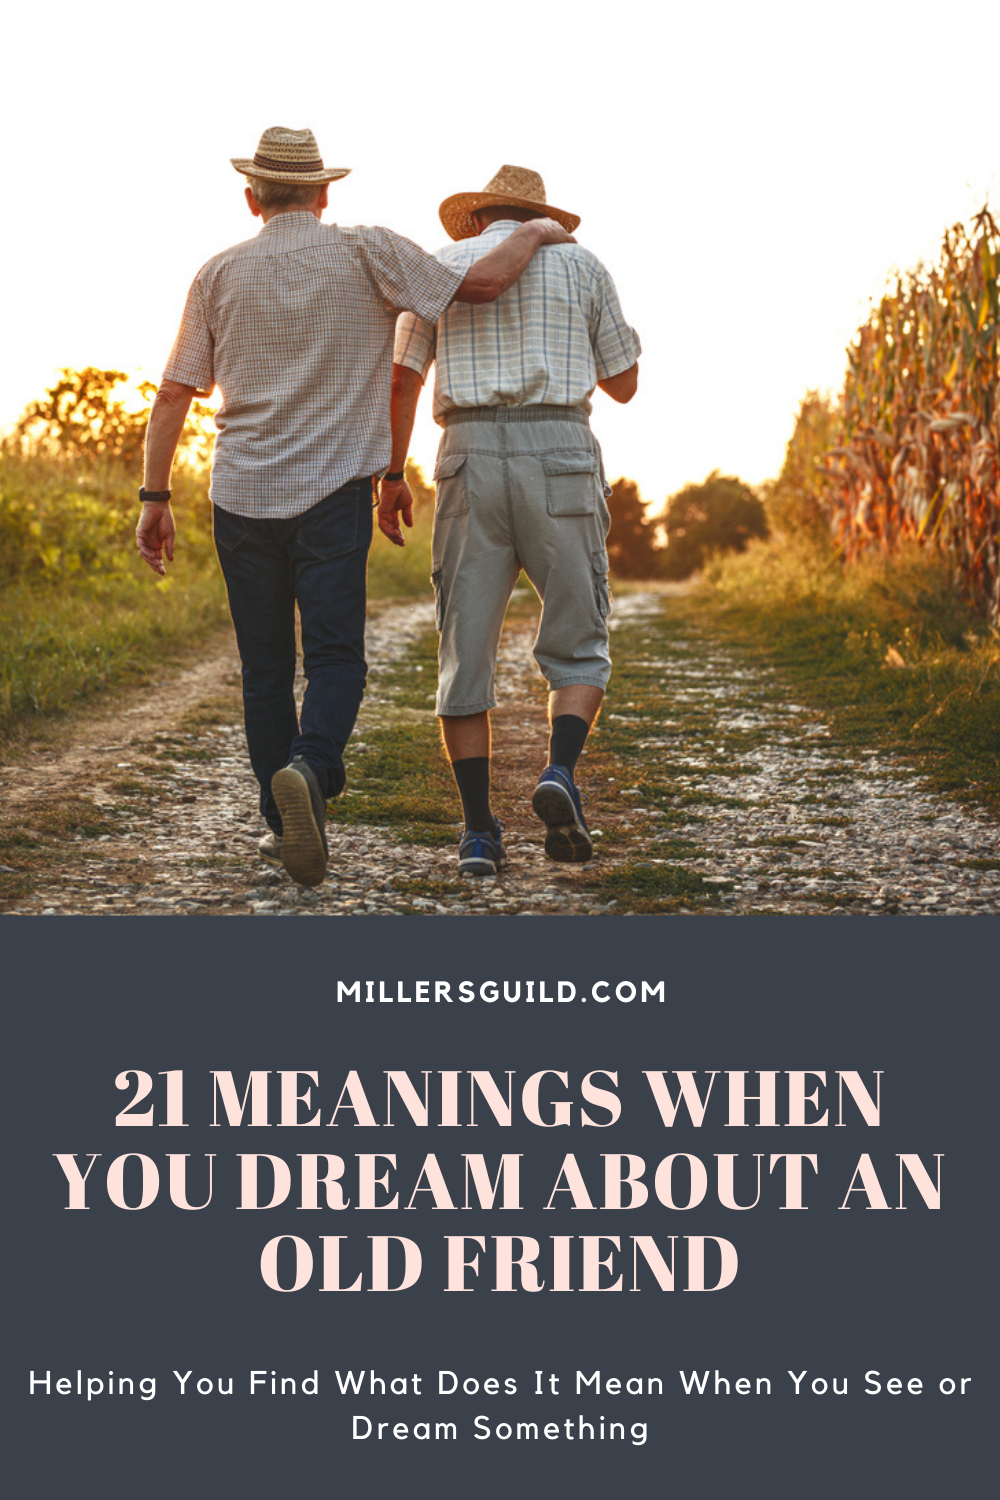 21 Meanings When You Dream About an Old Friend 1